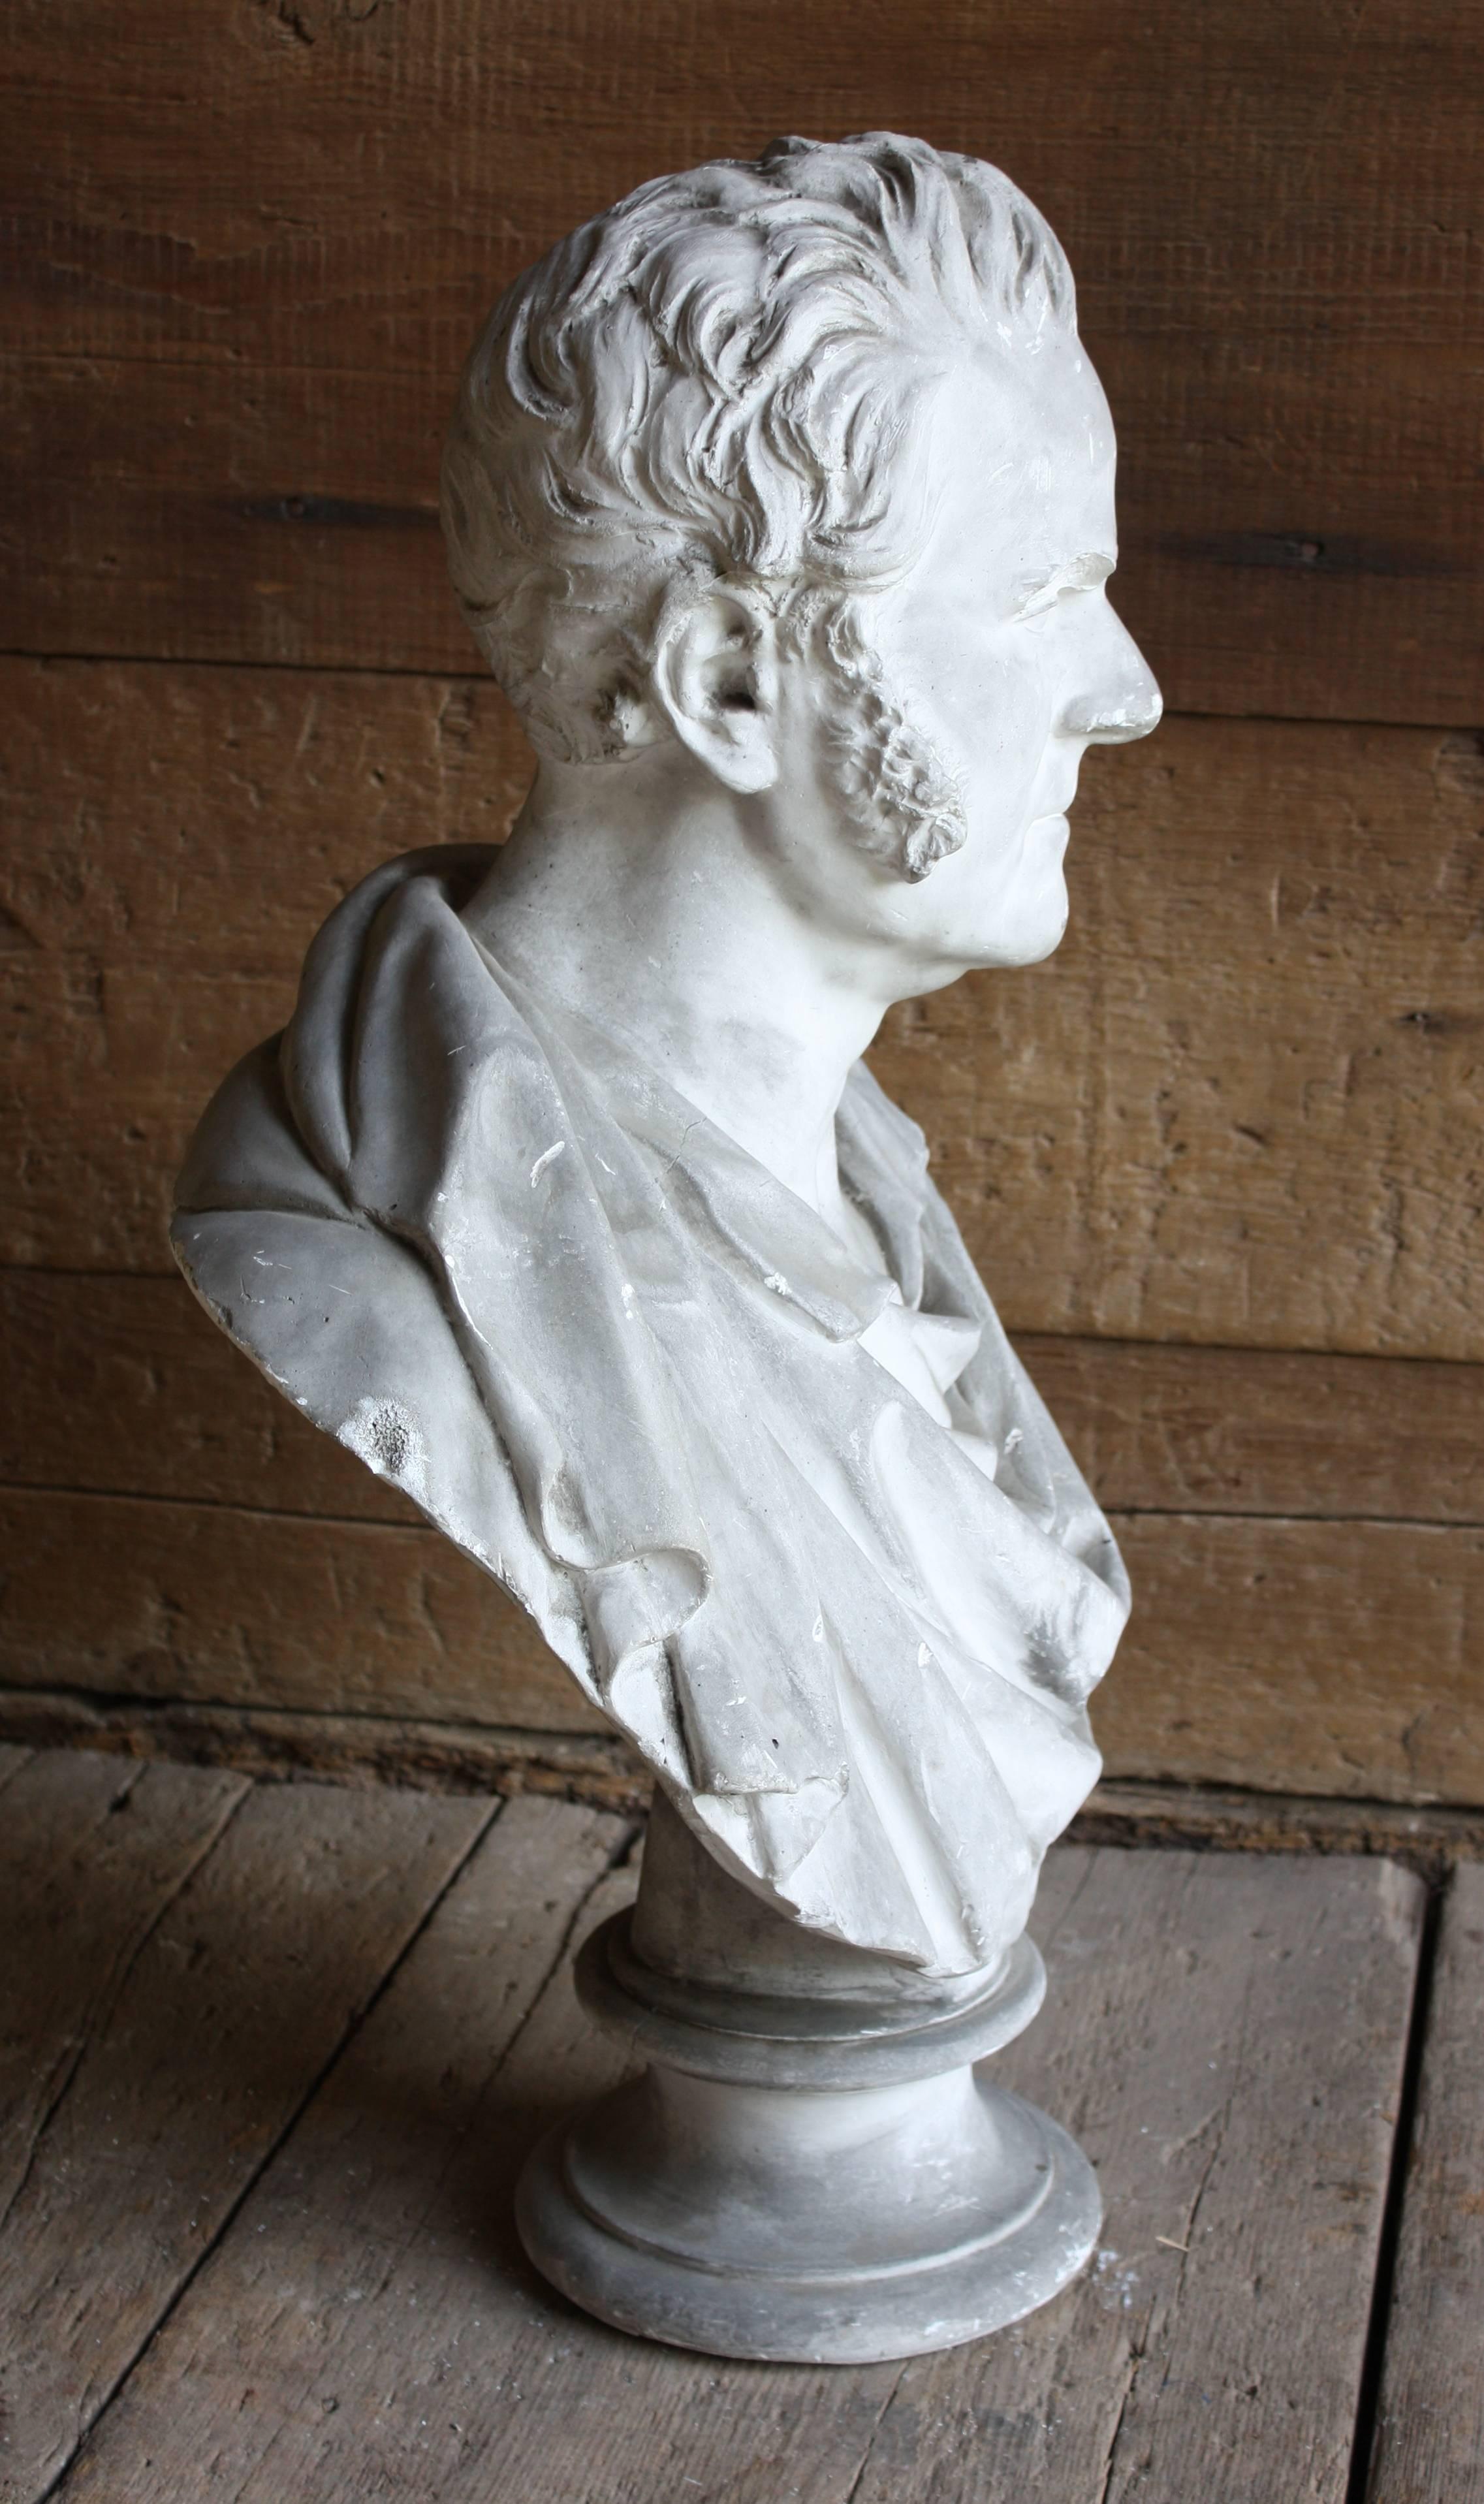 A great mid-19th century neoclassic bust of a gentleman in plaster.